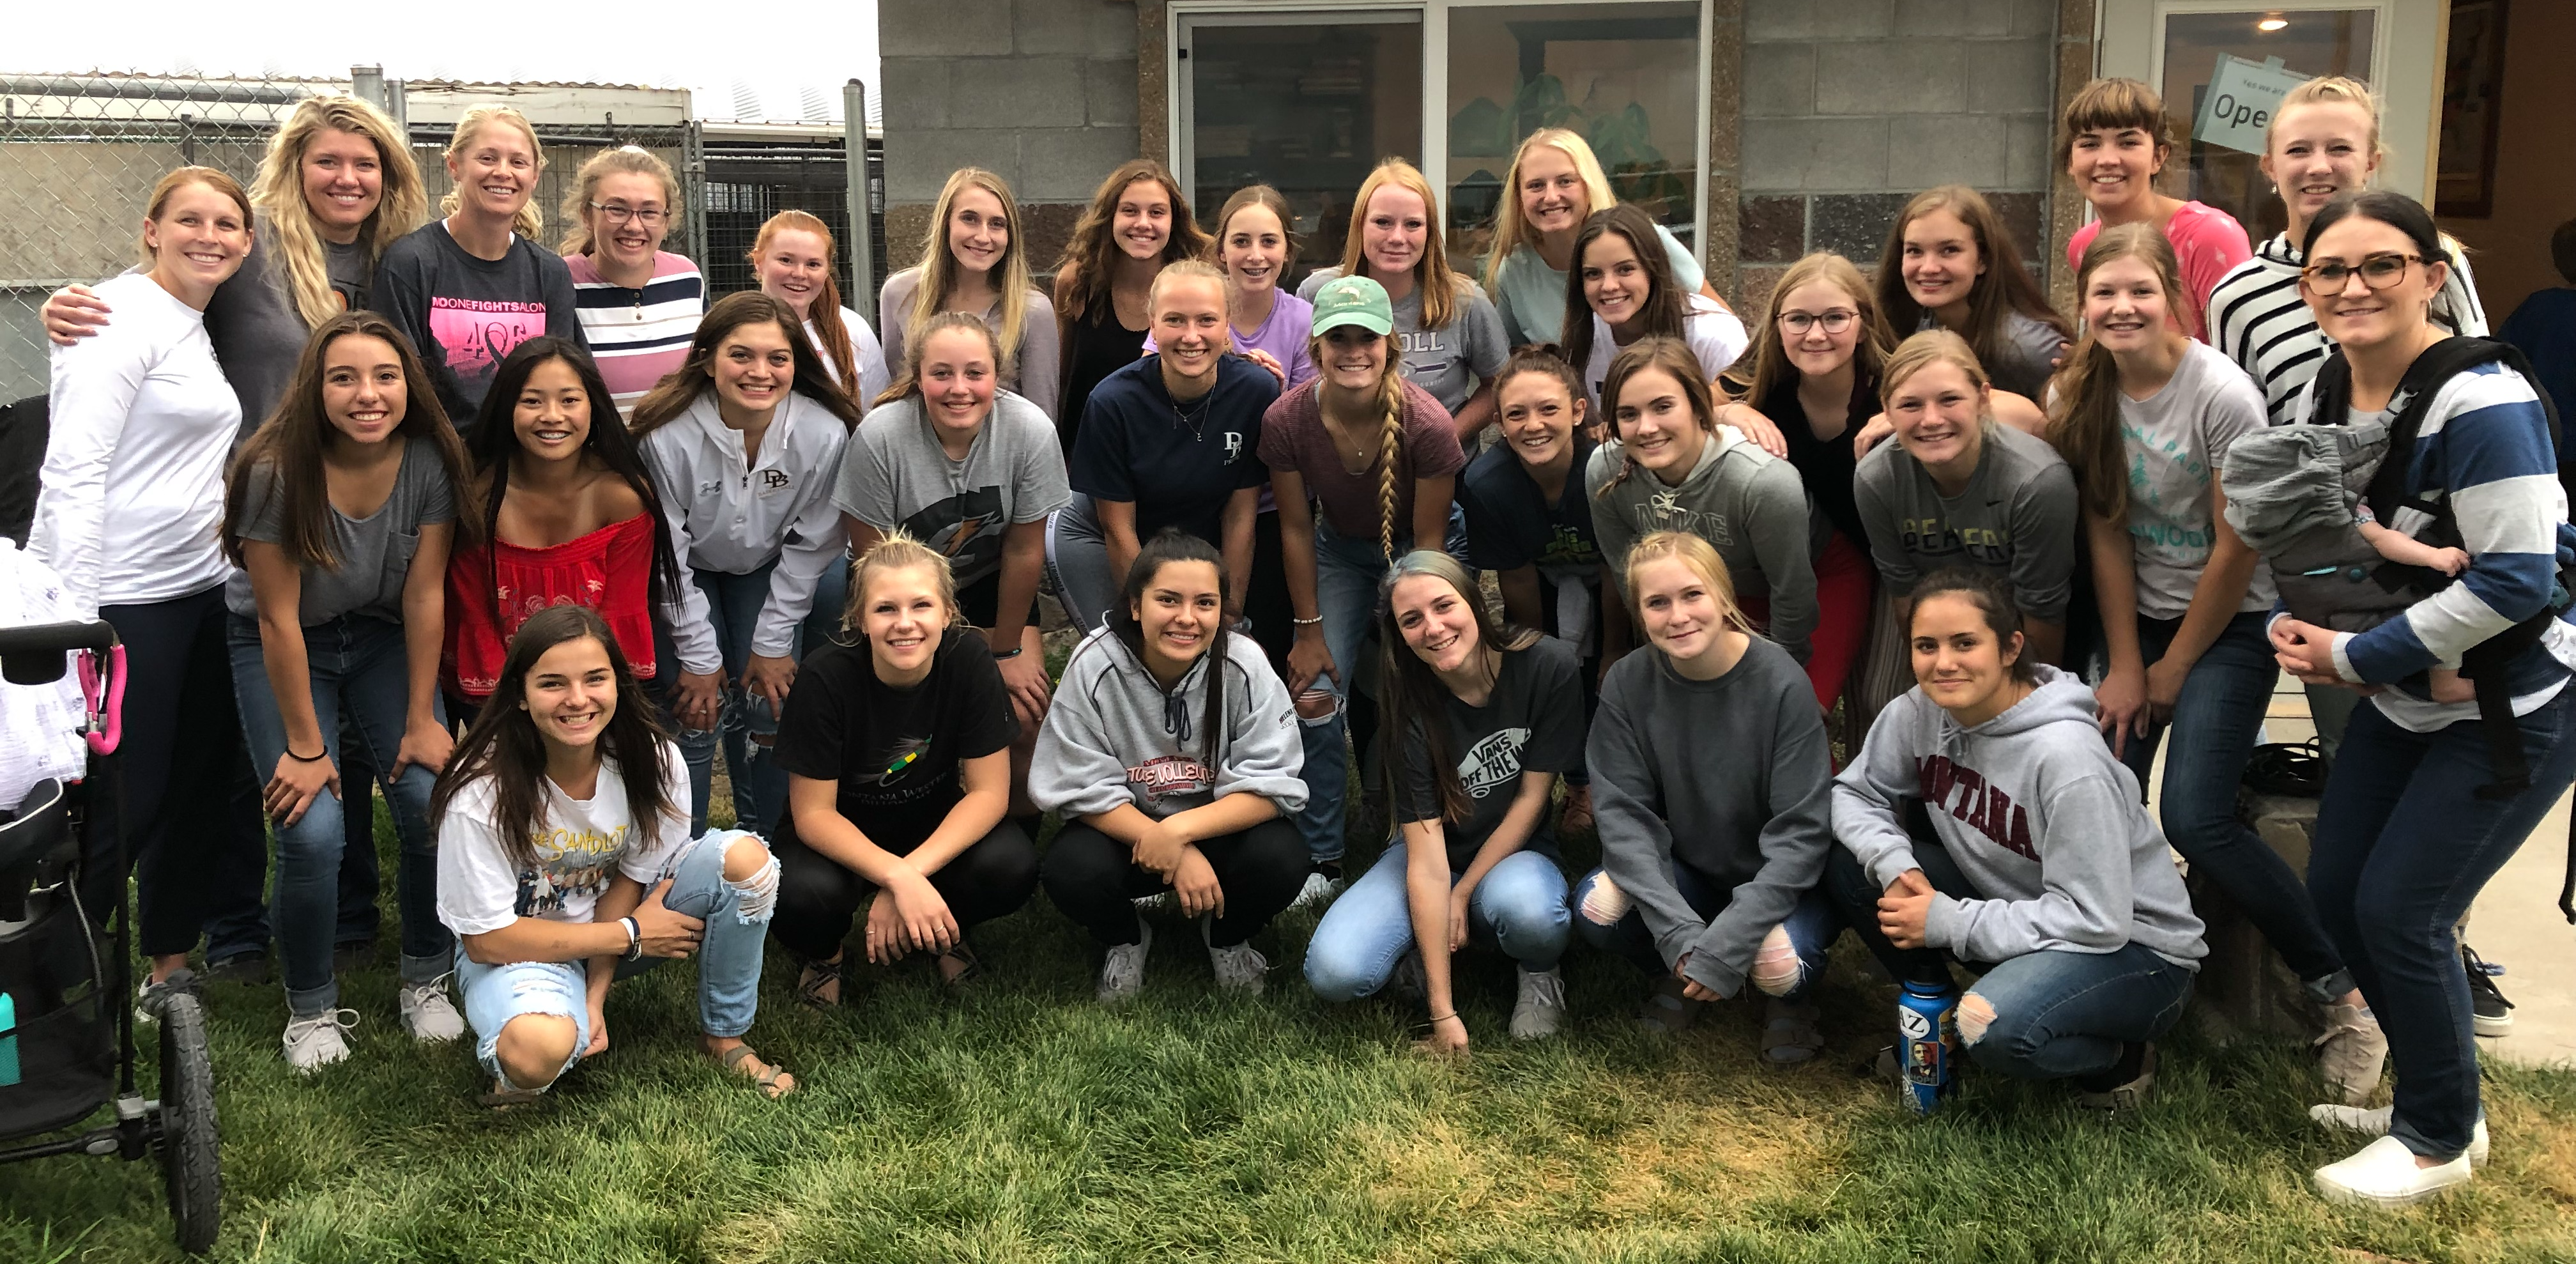 A photo of the volleyball team walking dogs at the local Humane Society in September 2019